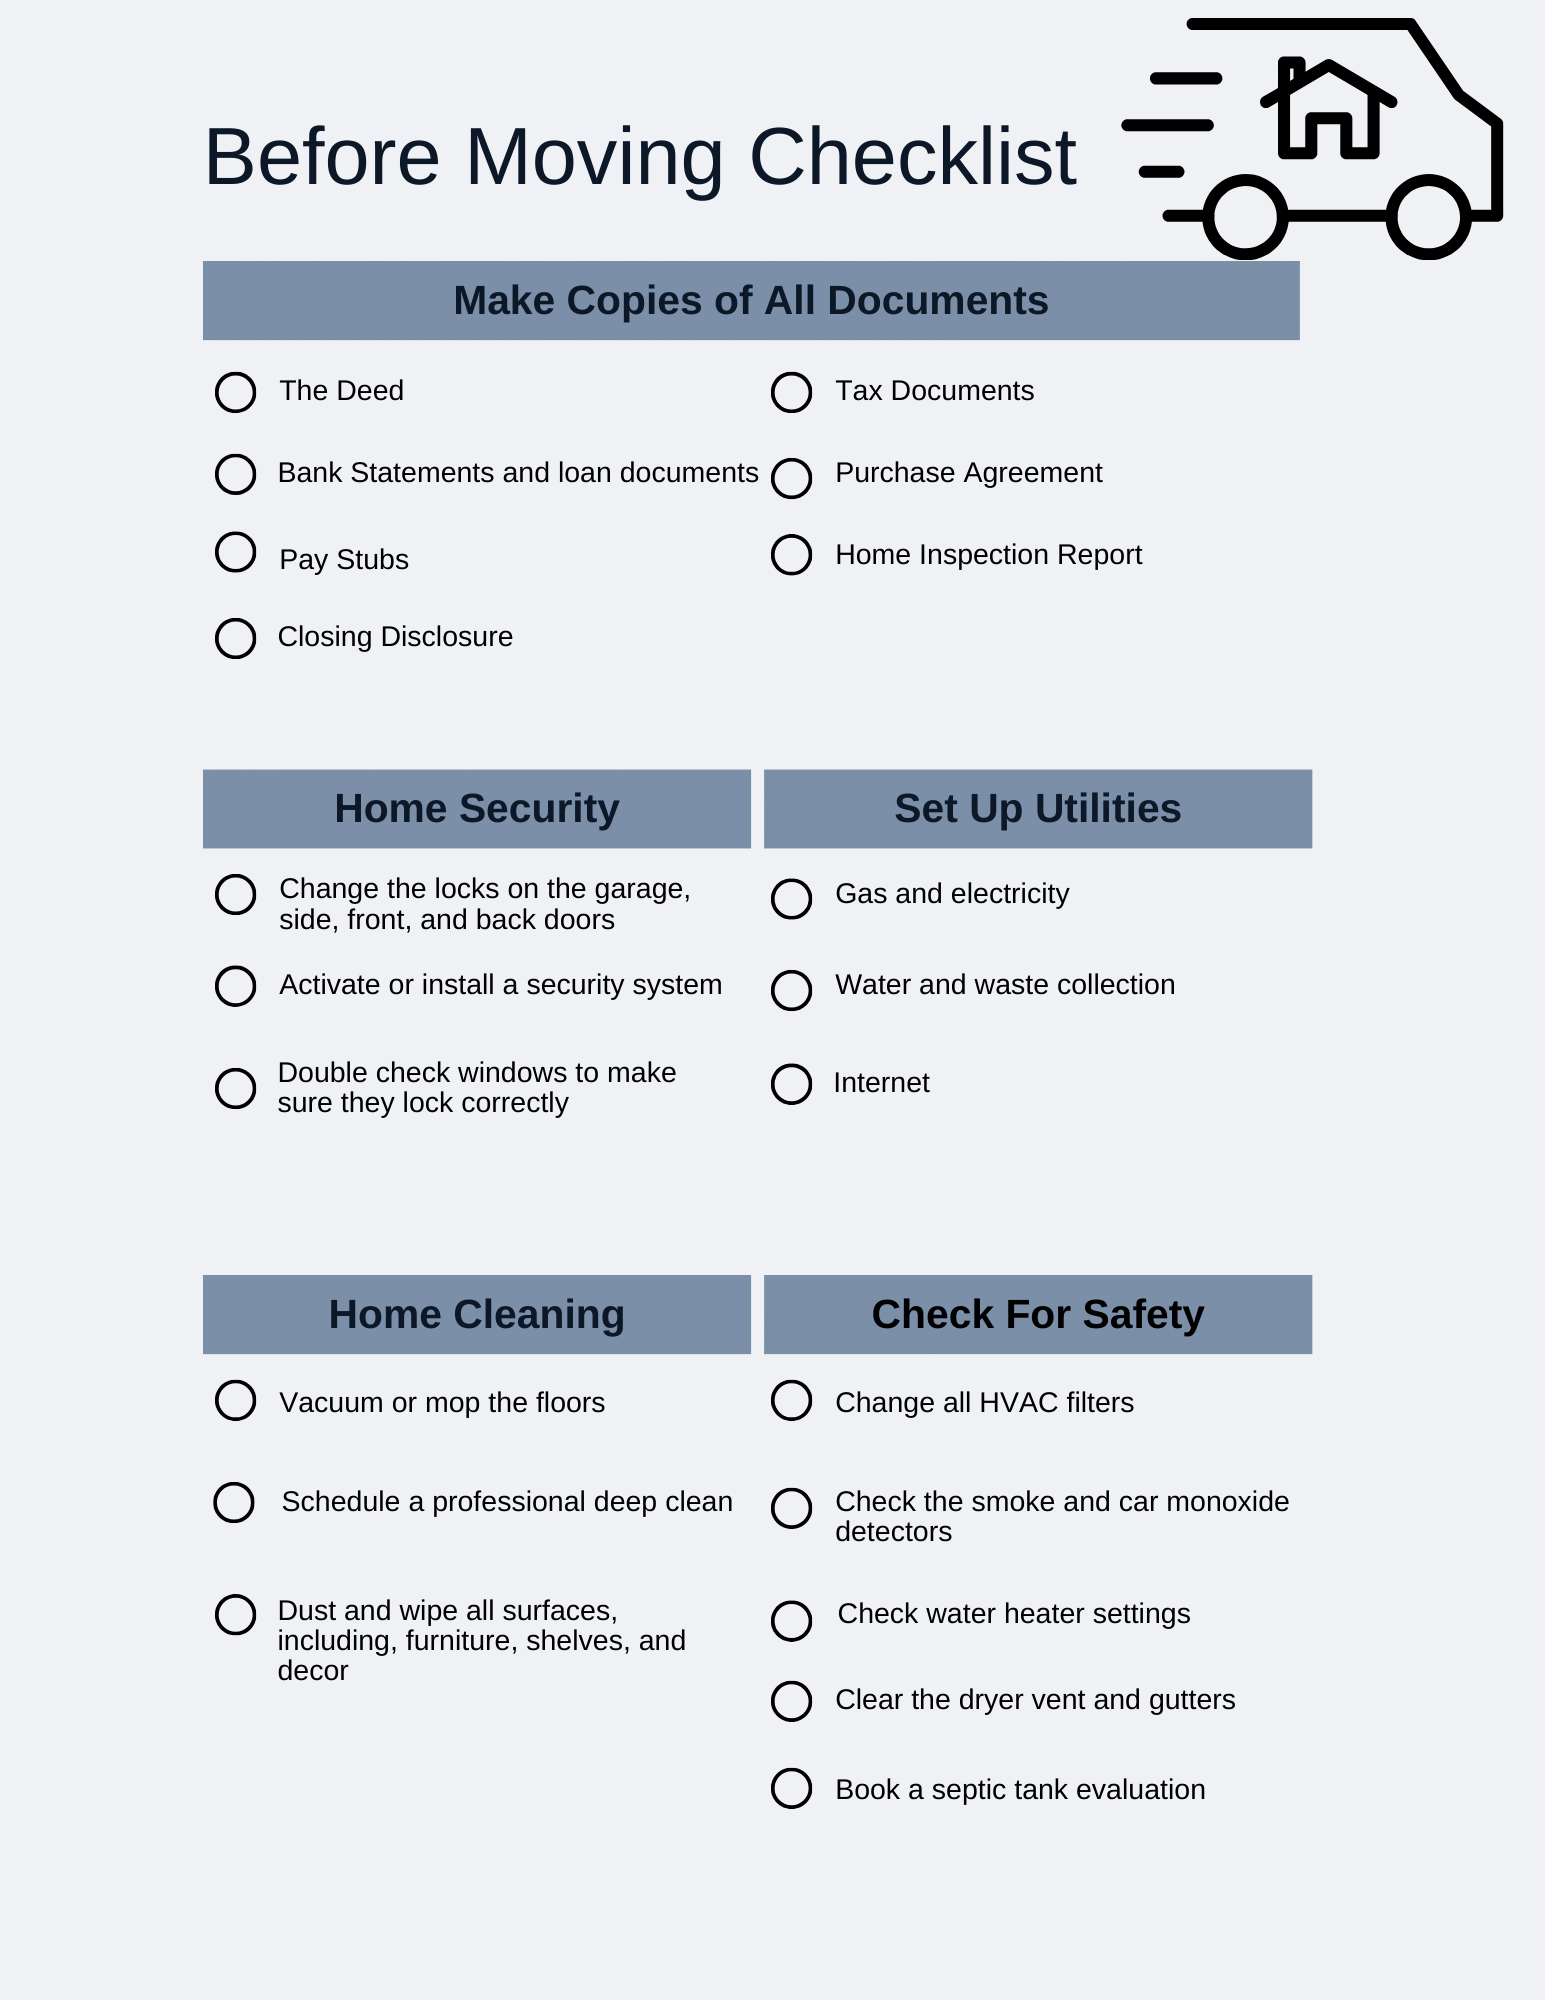 Before Moving Checklist